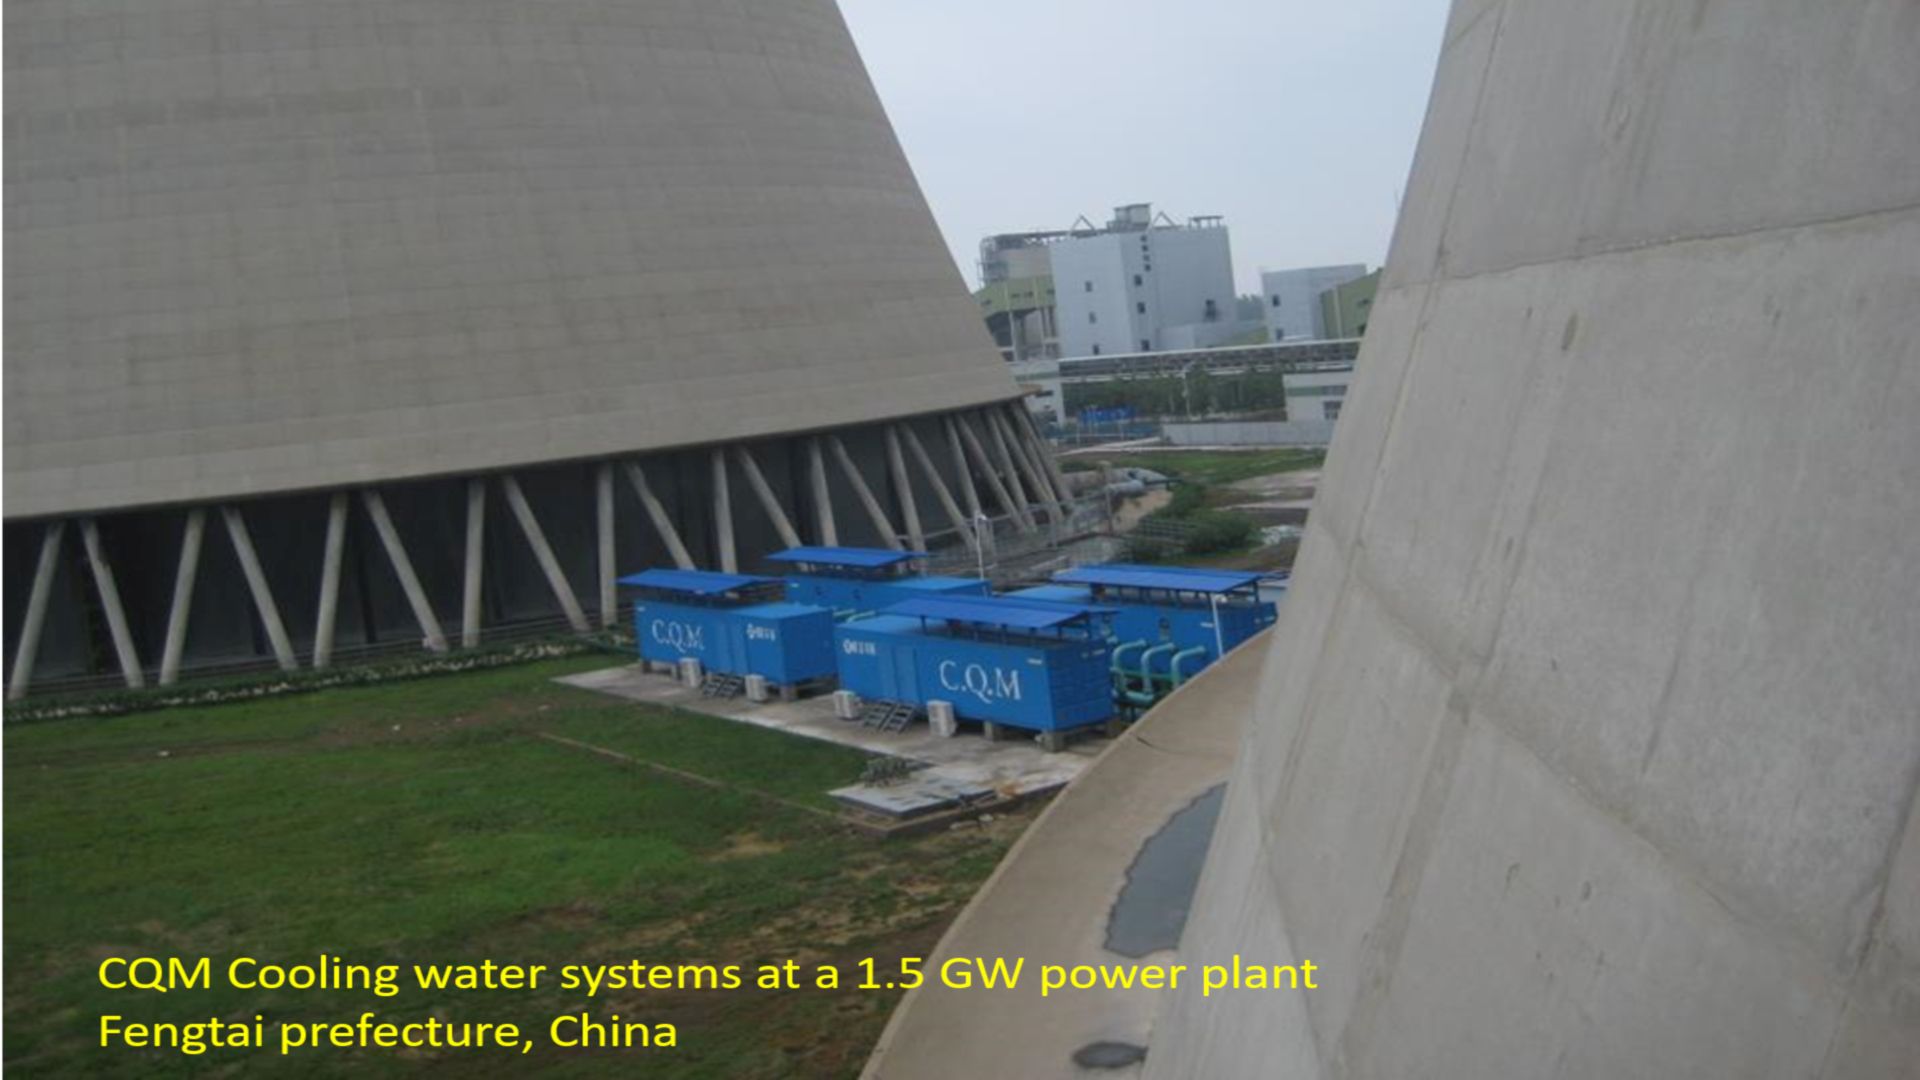 CQM Cooling water treatment systems at the 1.6 GW power plant, China logo